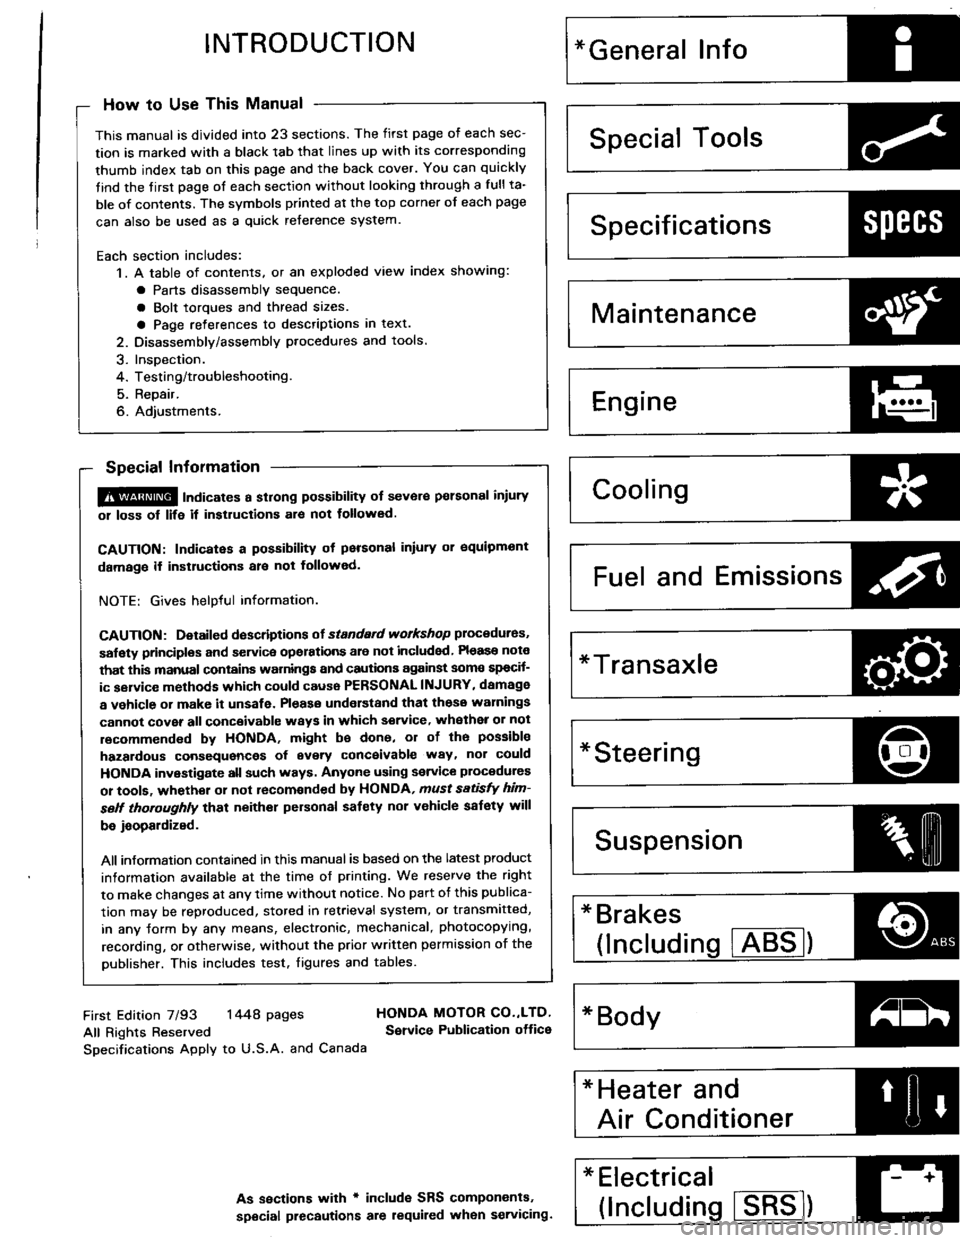 ACURA INTEGRA 1994  Service Repair Manual INTRODUCTION
How to Use This Manual
This manual is divided into 23 sections. The first page of each sec-
tion is marked with a black tab that lines up with its corresponding
thumb index tab on this pa